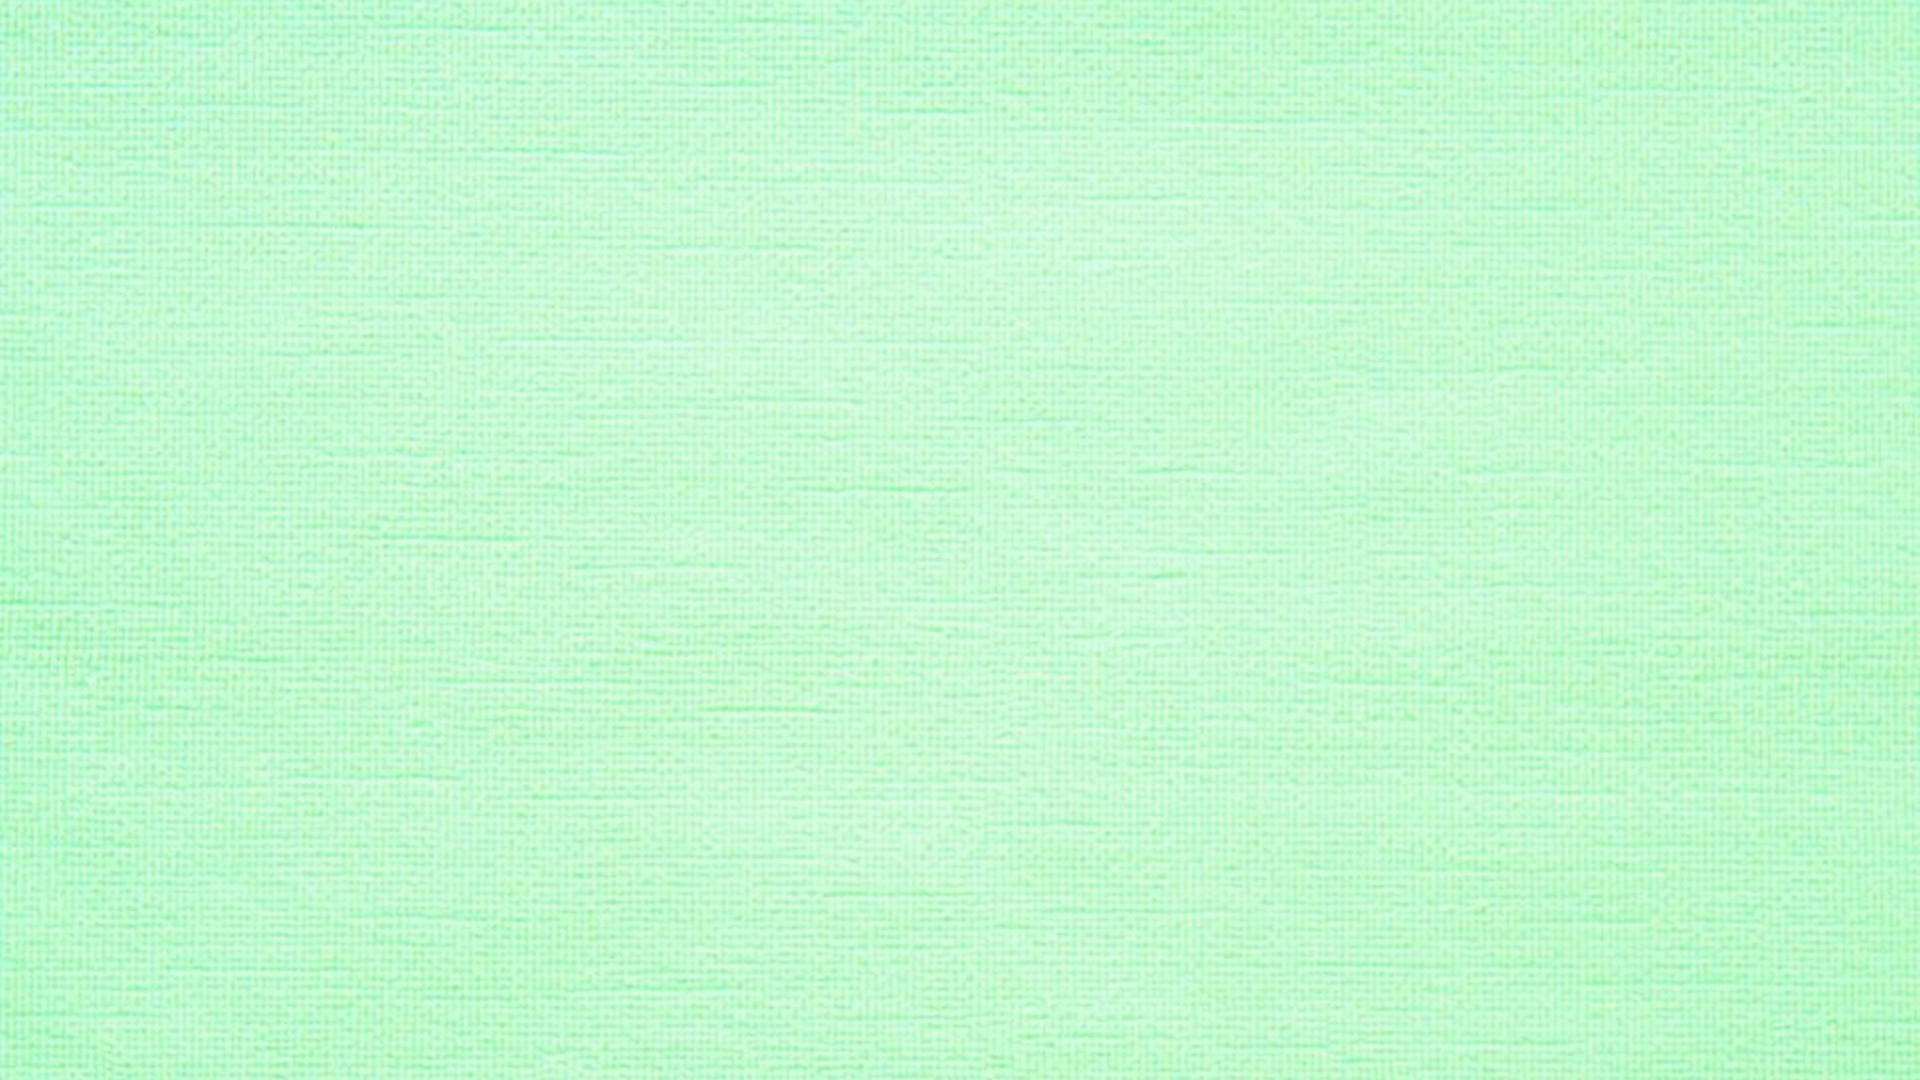 HD Mint Green Backgrounds with image resolution 1920x1080 pixel. You can use this wallpaper as background for your desktop Computer Screensavers, Android or iPhone smartphones